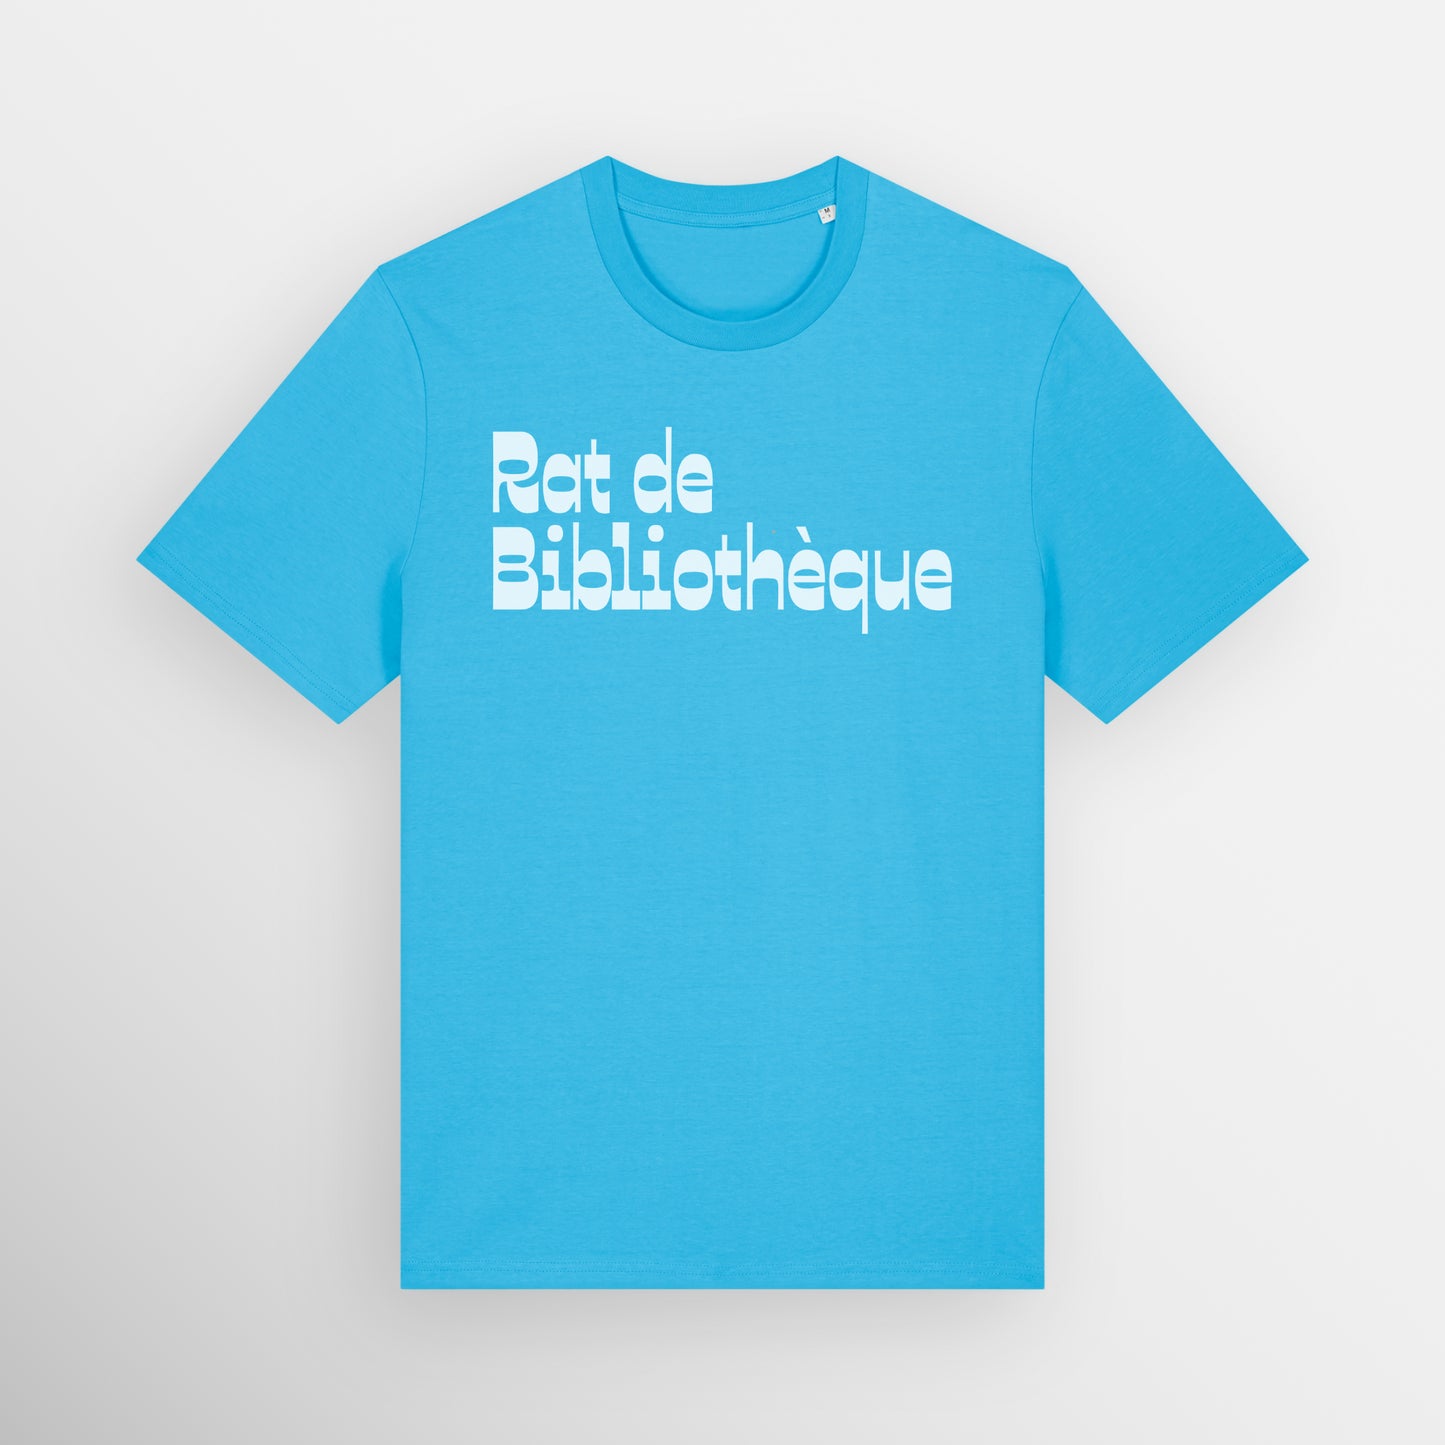 Aqua Blue coloured regular fit t-shirt with Rat de Bibliothèque written on the front in white, which is French for bookworm.